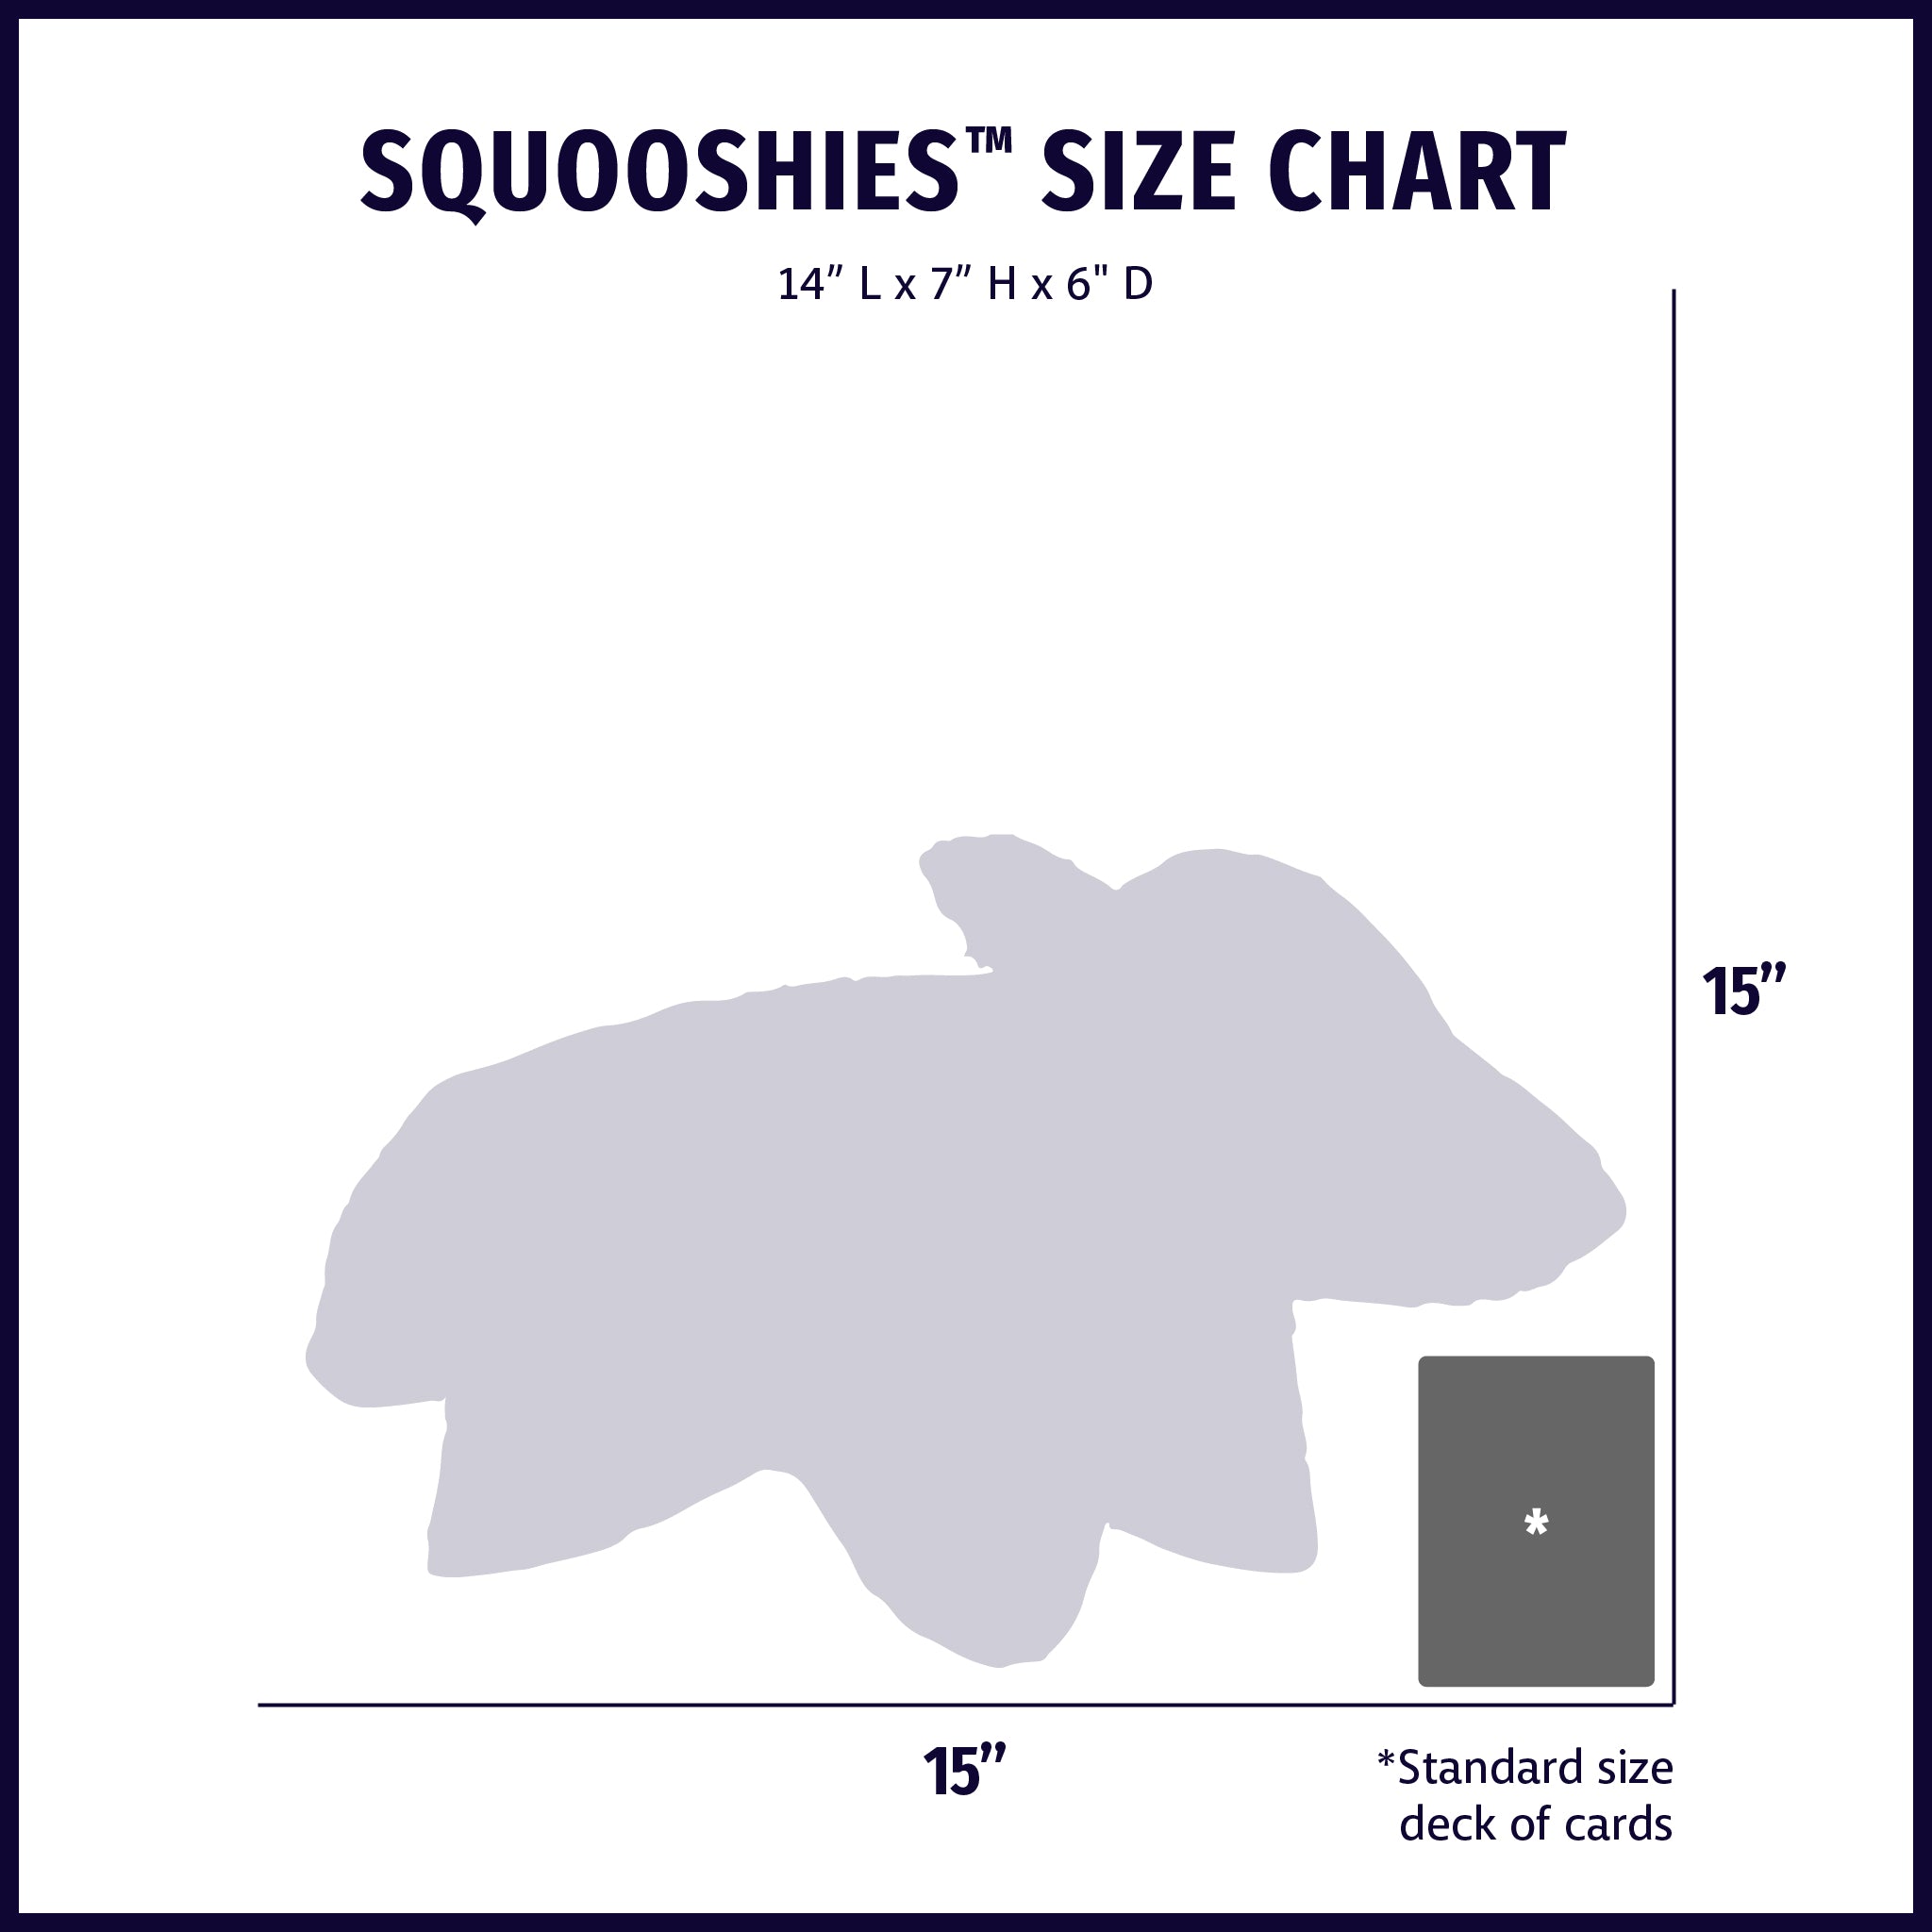 Size chart displaying Squooshies™ plush dog toy silhouette with approximate dimensions compared to standard size deck of cards.